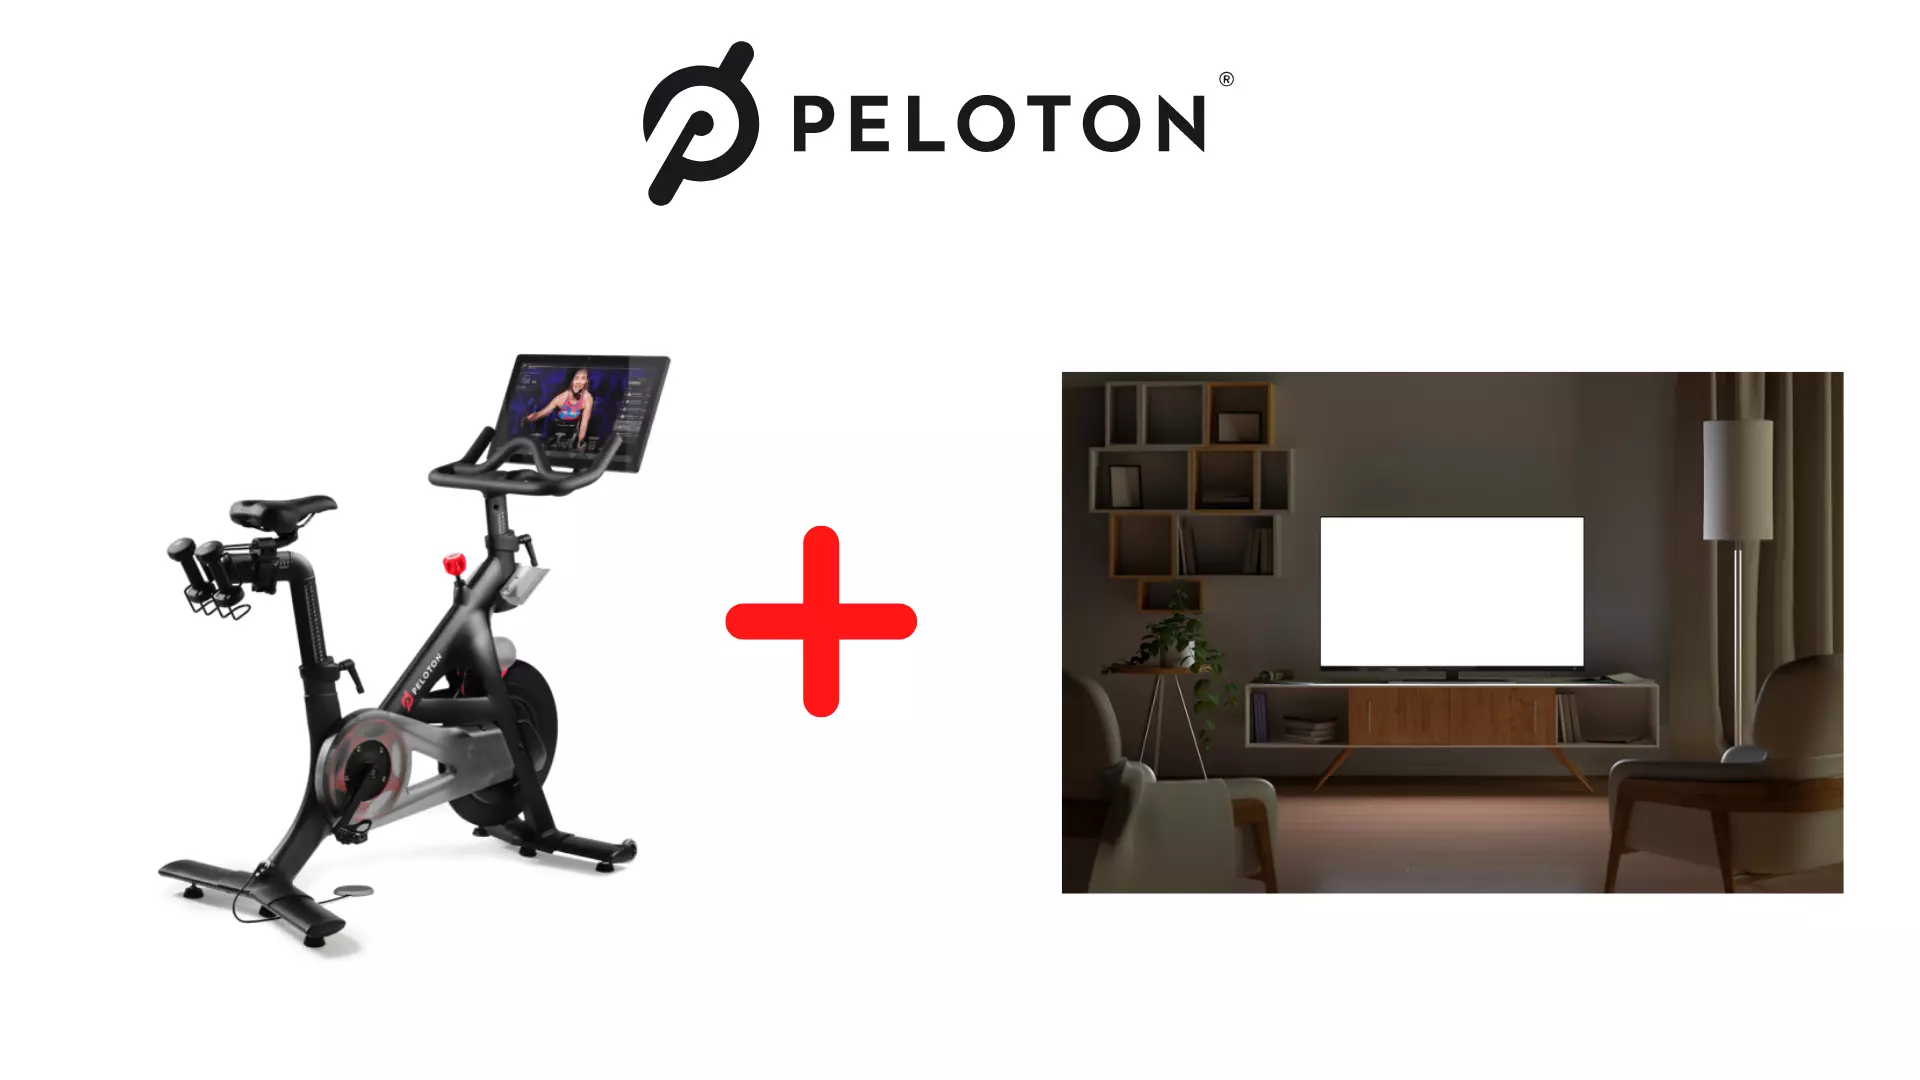 Cast From The Peloton Bike Screen To A TV